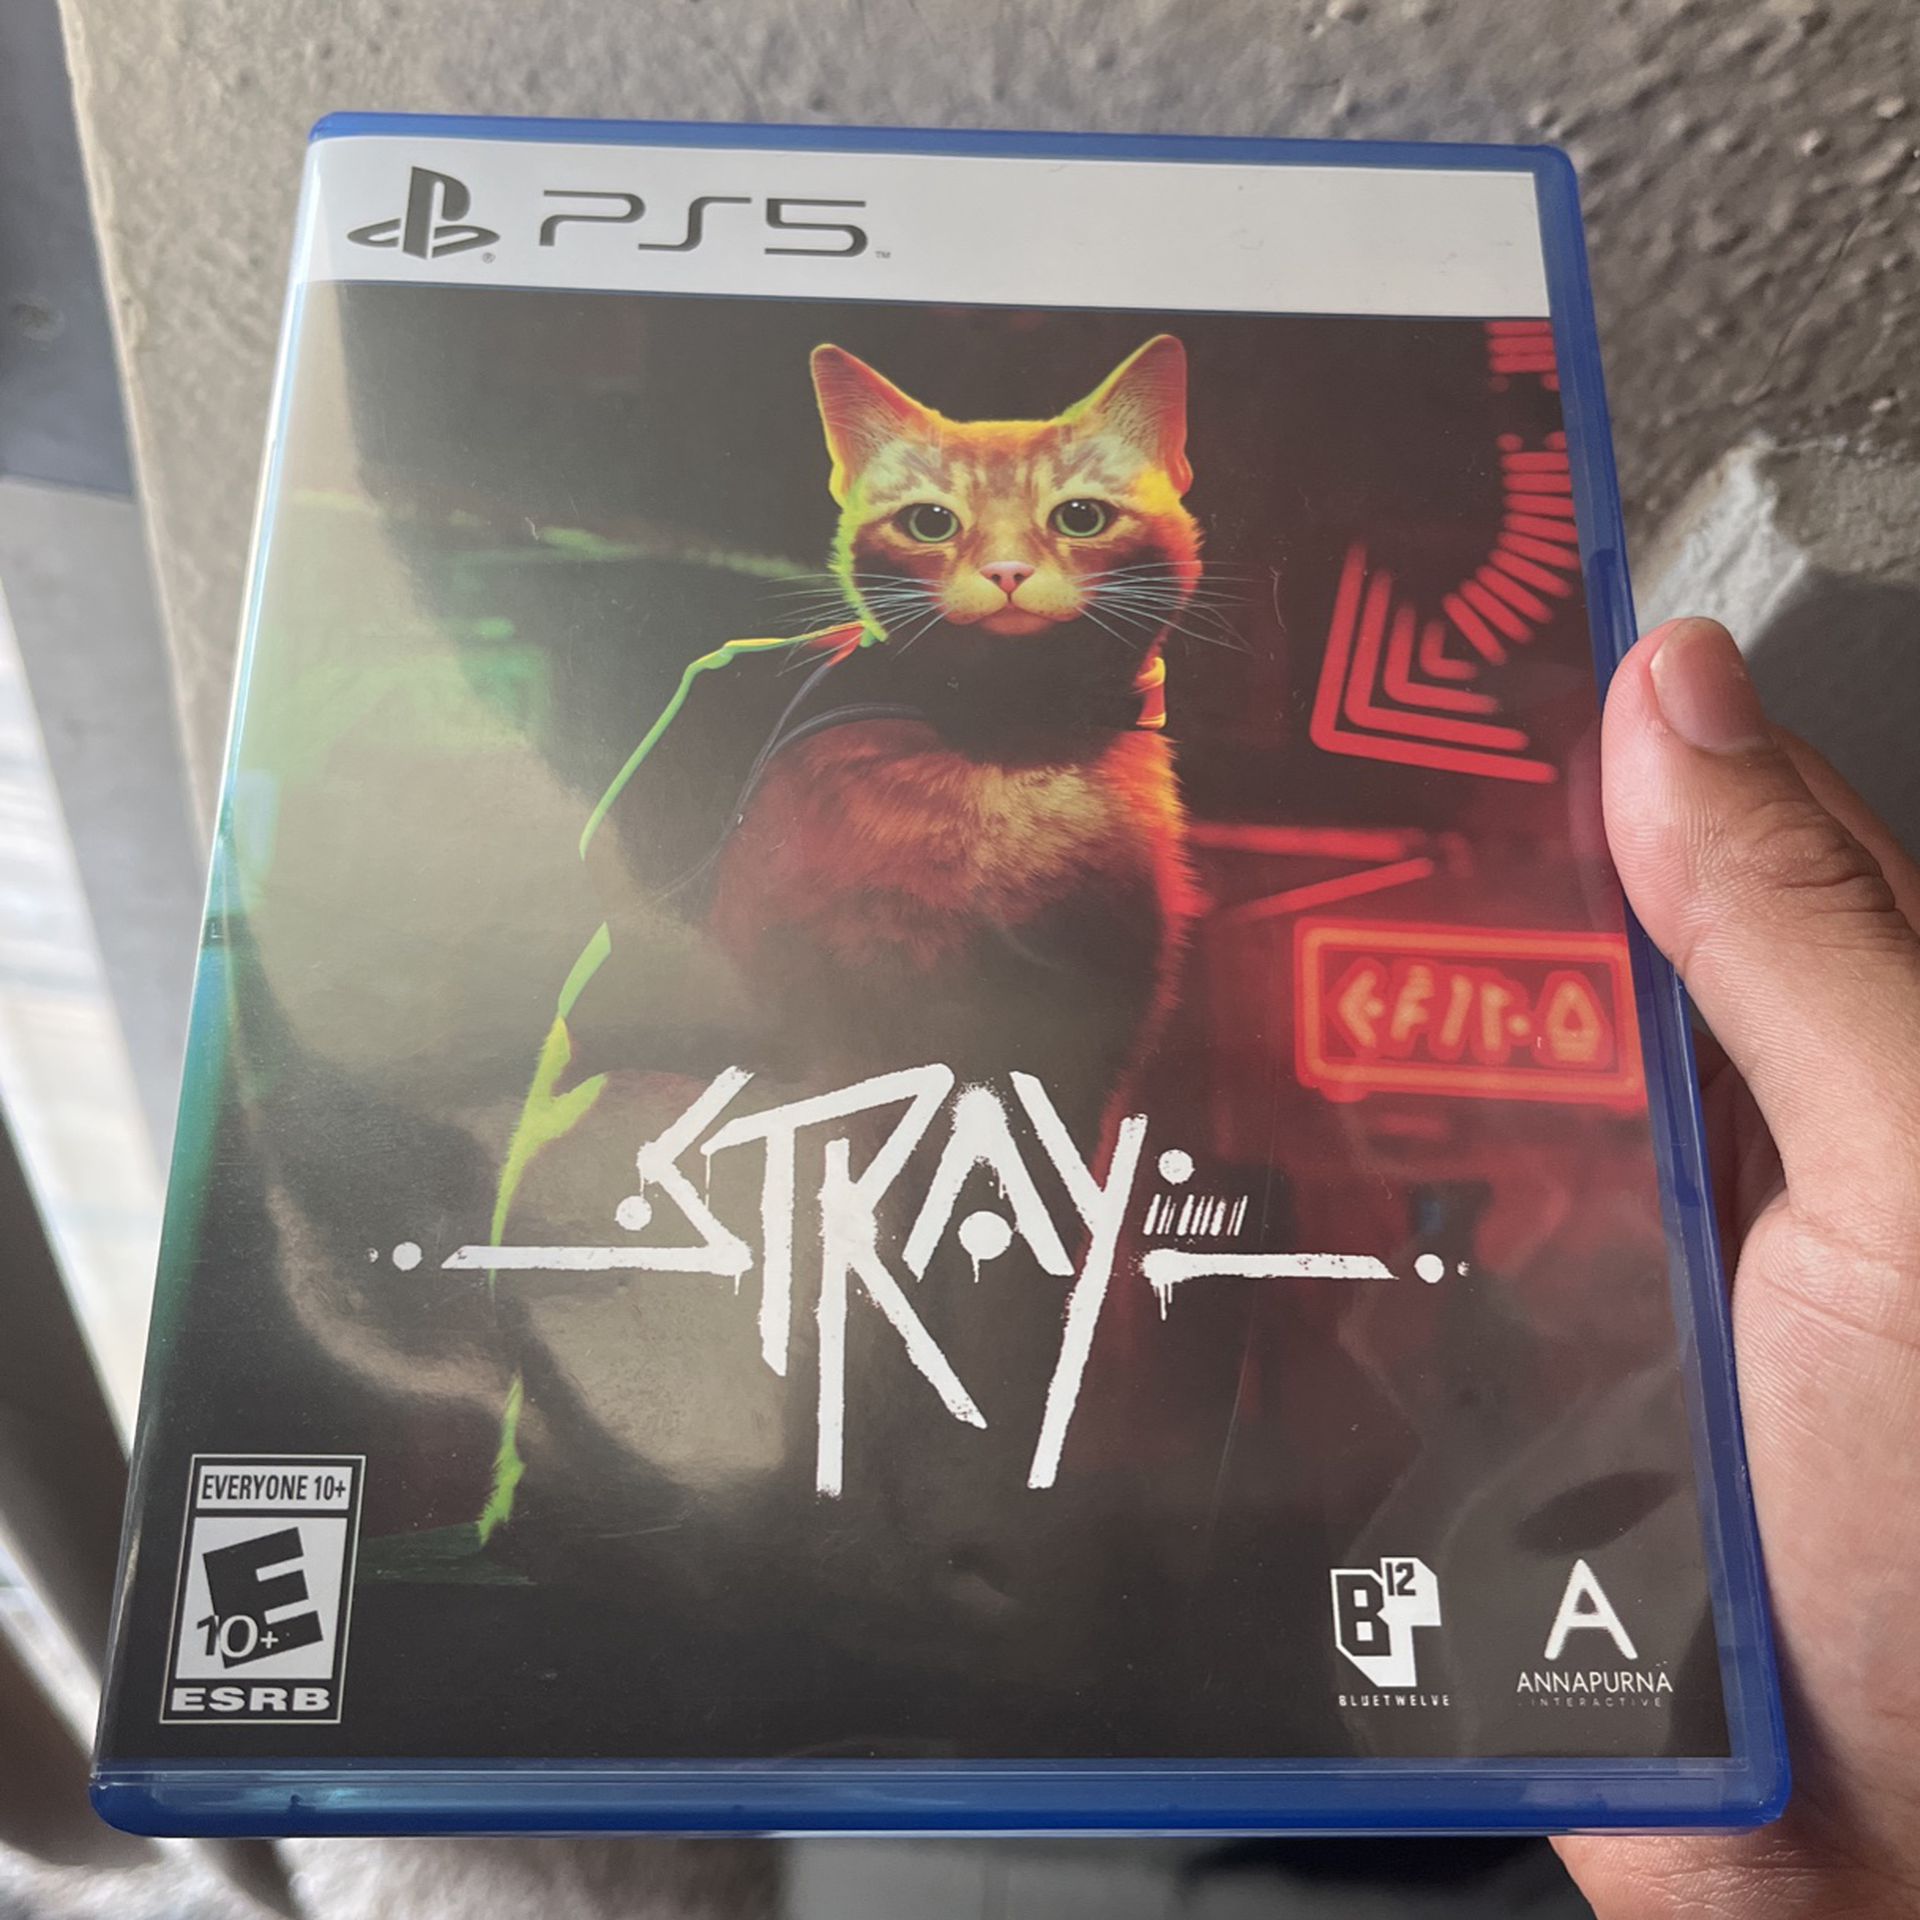 STRAY” PS5 GAME for Sale TX in - OfferUp Houston,